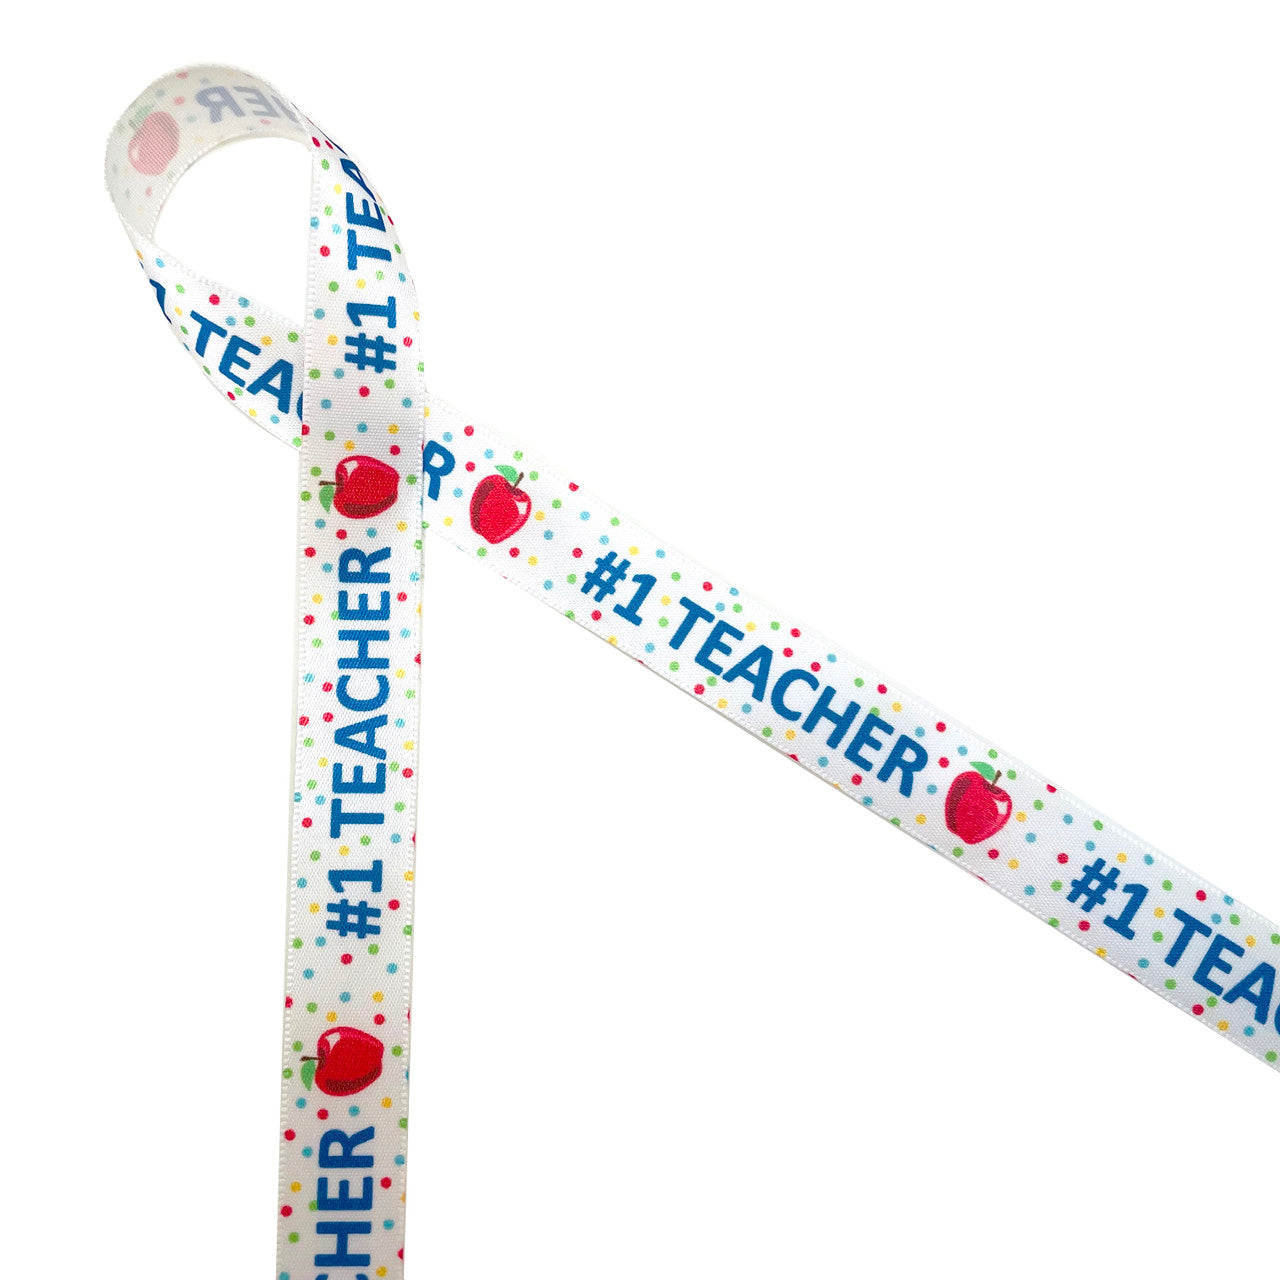 Teacher ribbon featuring #1 Teacher in royal blue with an apple on a polka dot background printed on 5/8" white single face satin is a fun ribbon for back to school events! This is a great ribbon for teacher appreciation, first day of school, last day of school and school themed crafts! All our ribbon is designed and printed in the USA